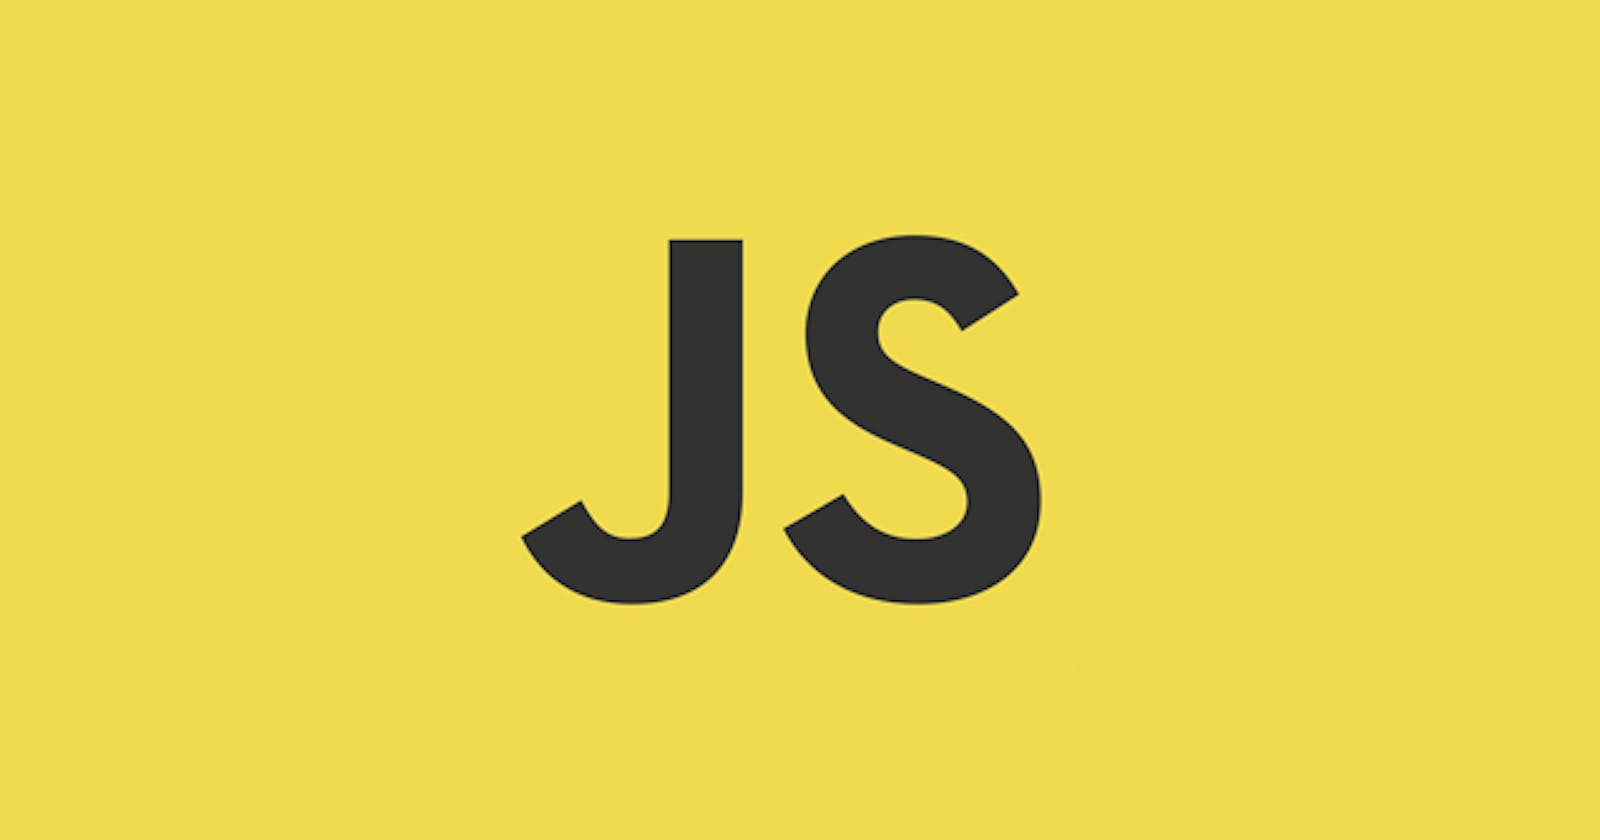 Object Oriented JavaScript In a Easy Way [Part-1]